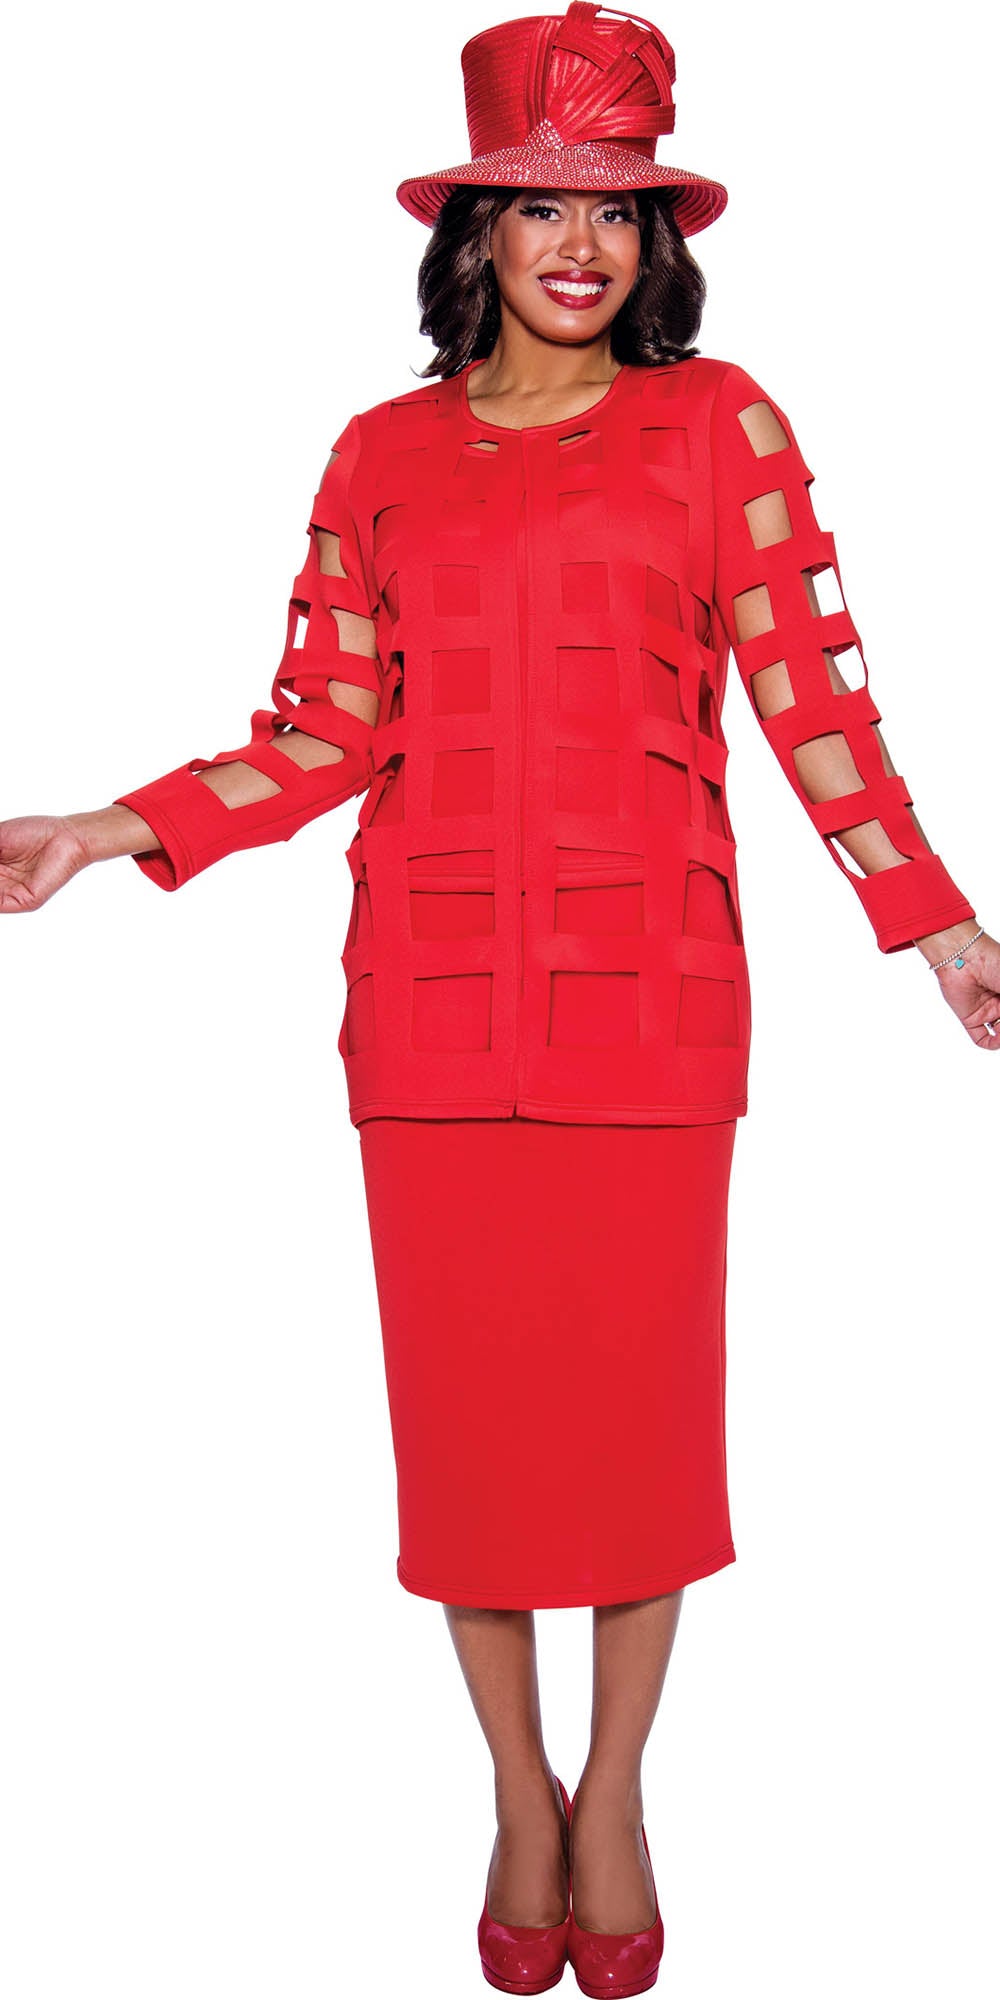 GMI G9203 - Red 3PC Skirt Suit with Lattice Cutout Styling